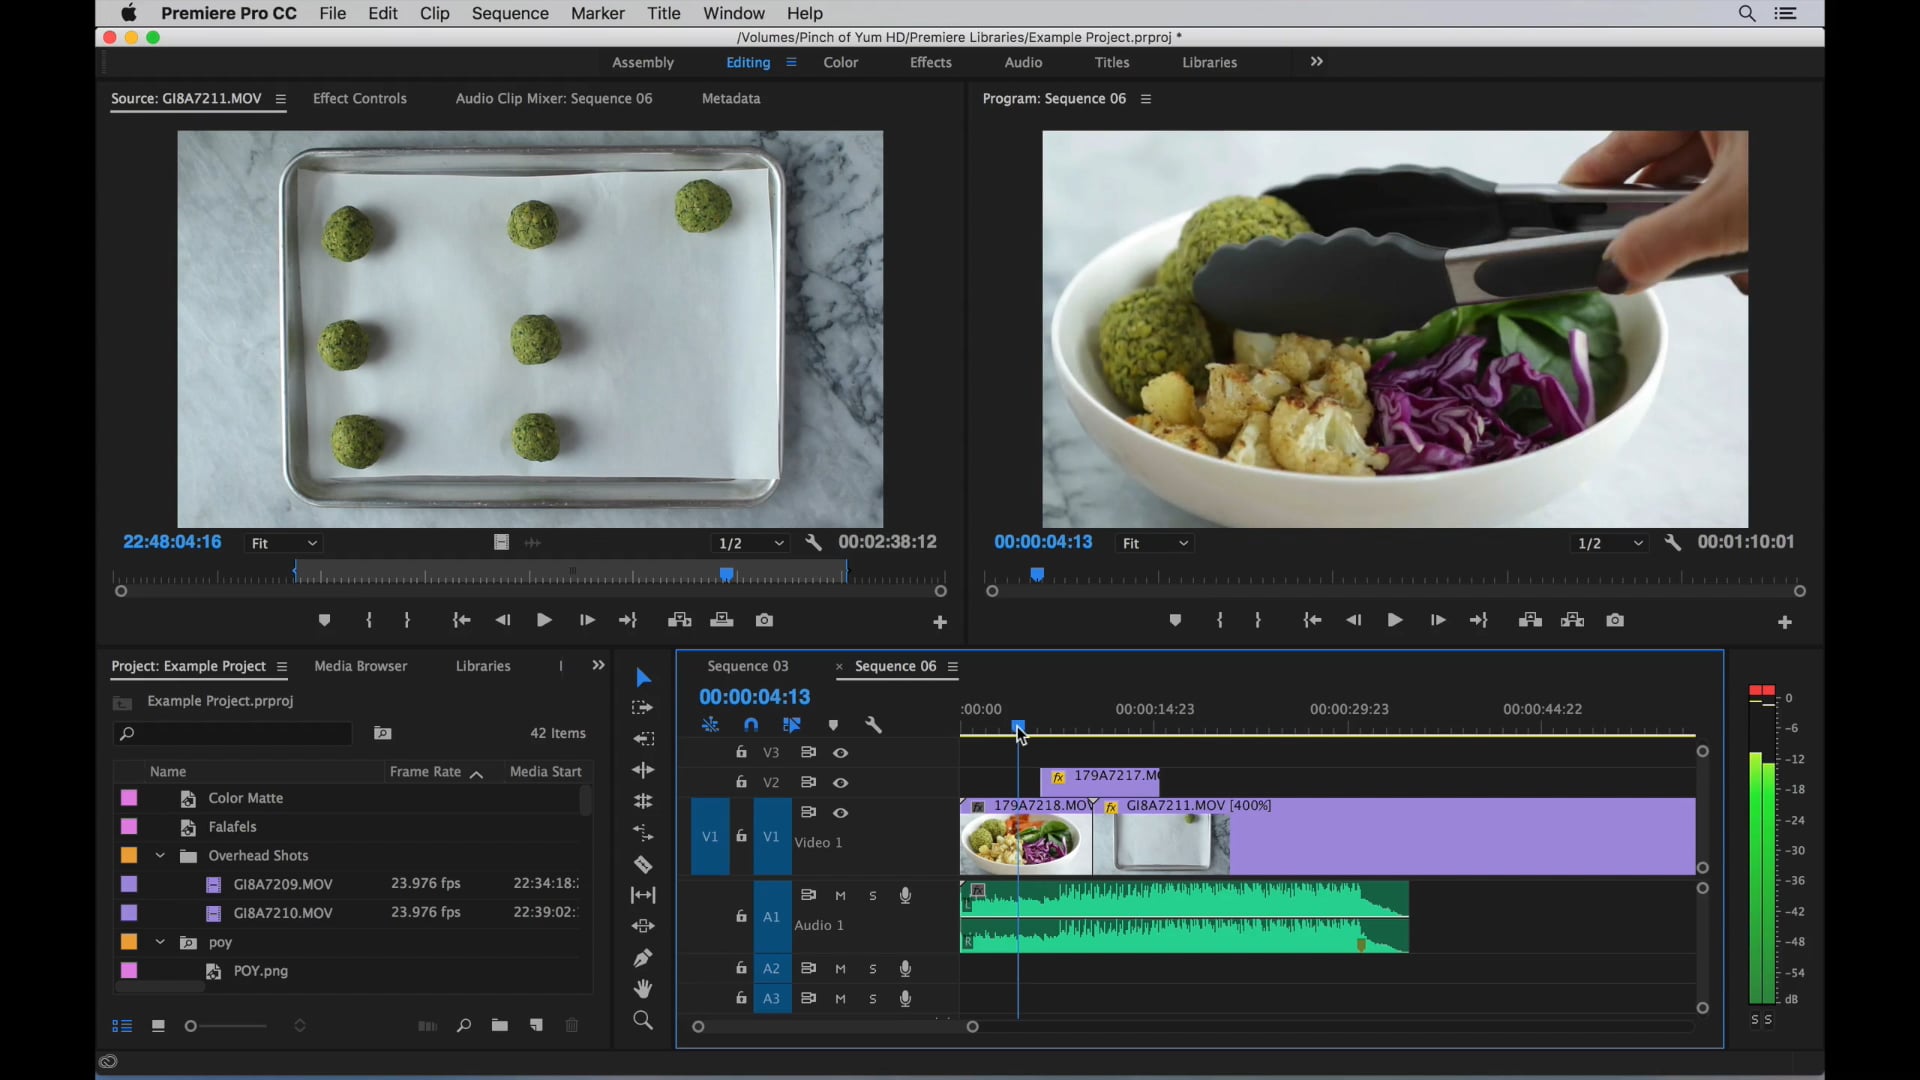 Screenshot of a video being edited in Adobe Premiere Pro